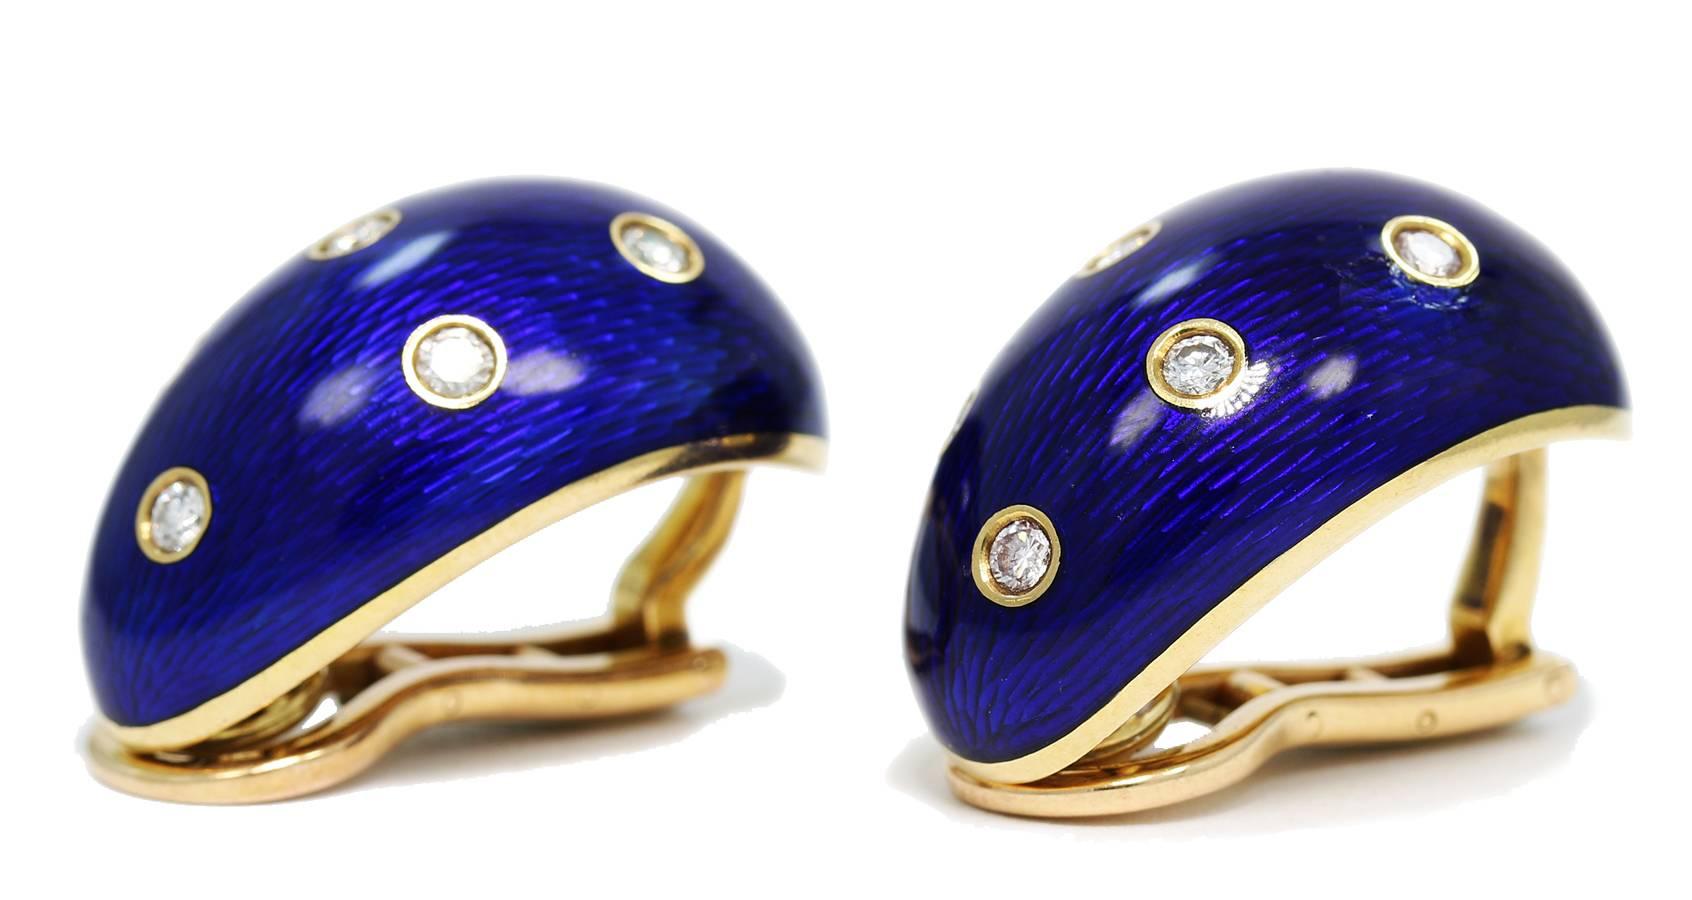 These estate Cartier earrings are absolutely beautiful. These are larger earrings created in 18k yellow gold with blue enameling and approximately .70cts total diamond weight of round brilliant cut diamonds. All diamonds are bezel set. There is a